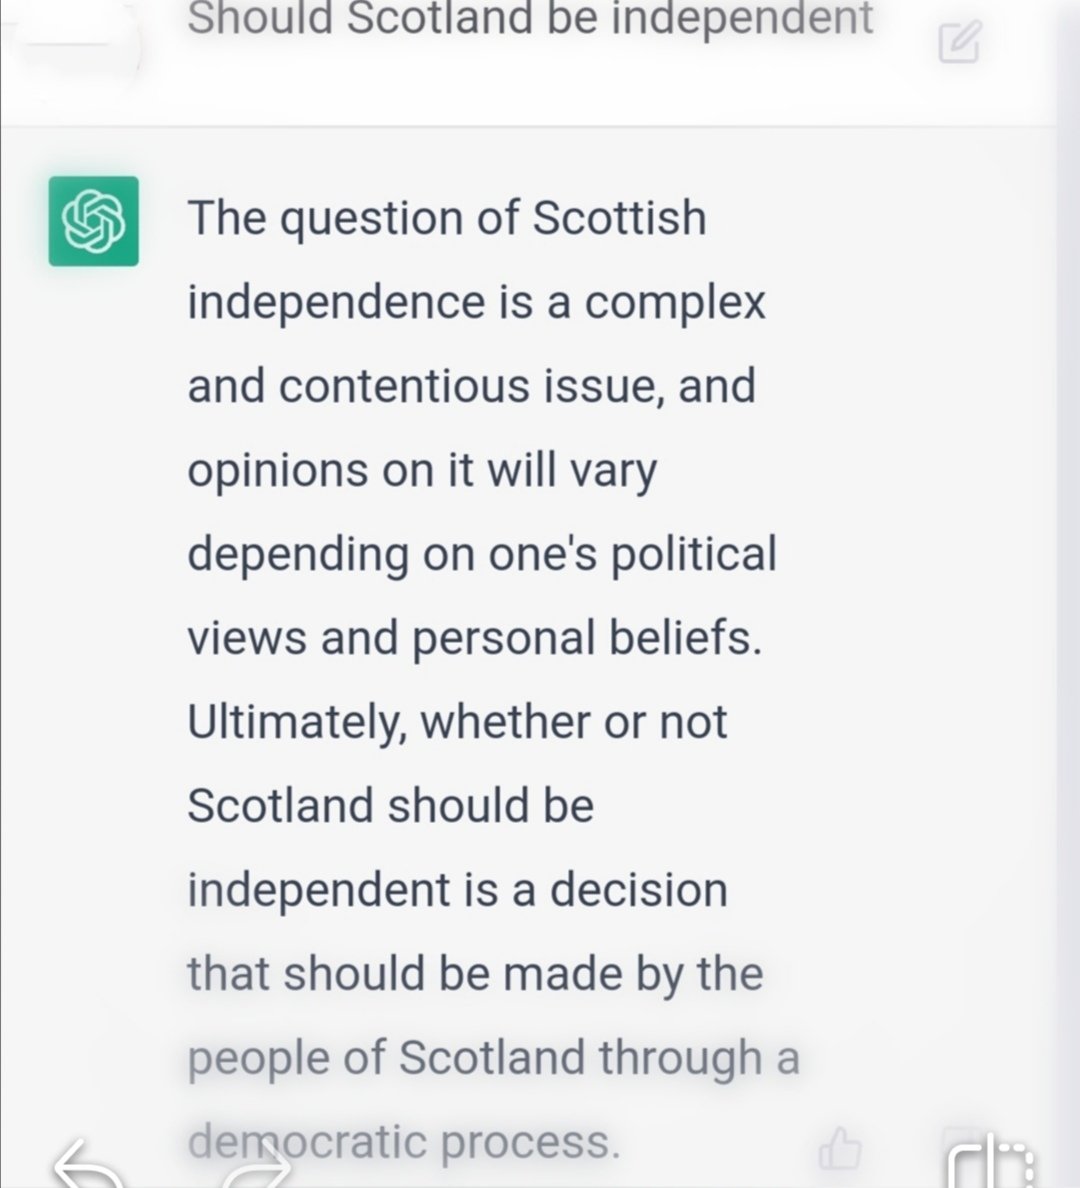 Been mucking about with chatgpt. Asked random questions. I like this answer. Decision should be made by the Scottish people.
#Indyref2023 #ScottishIndependence